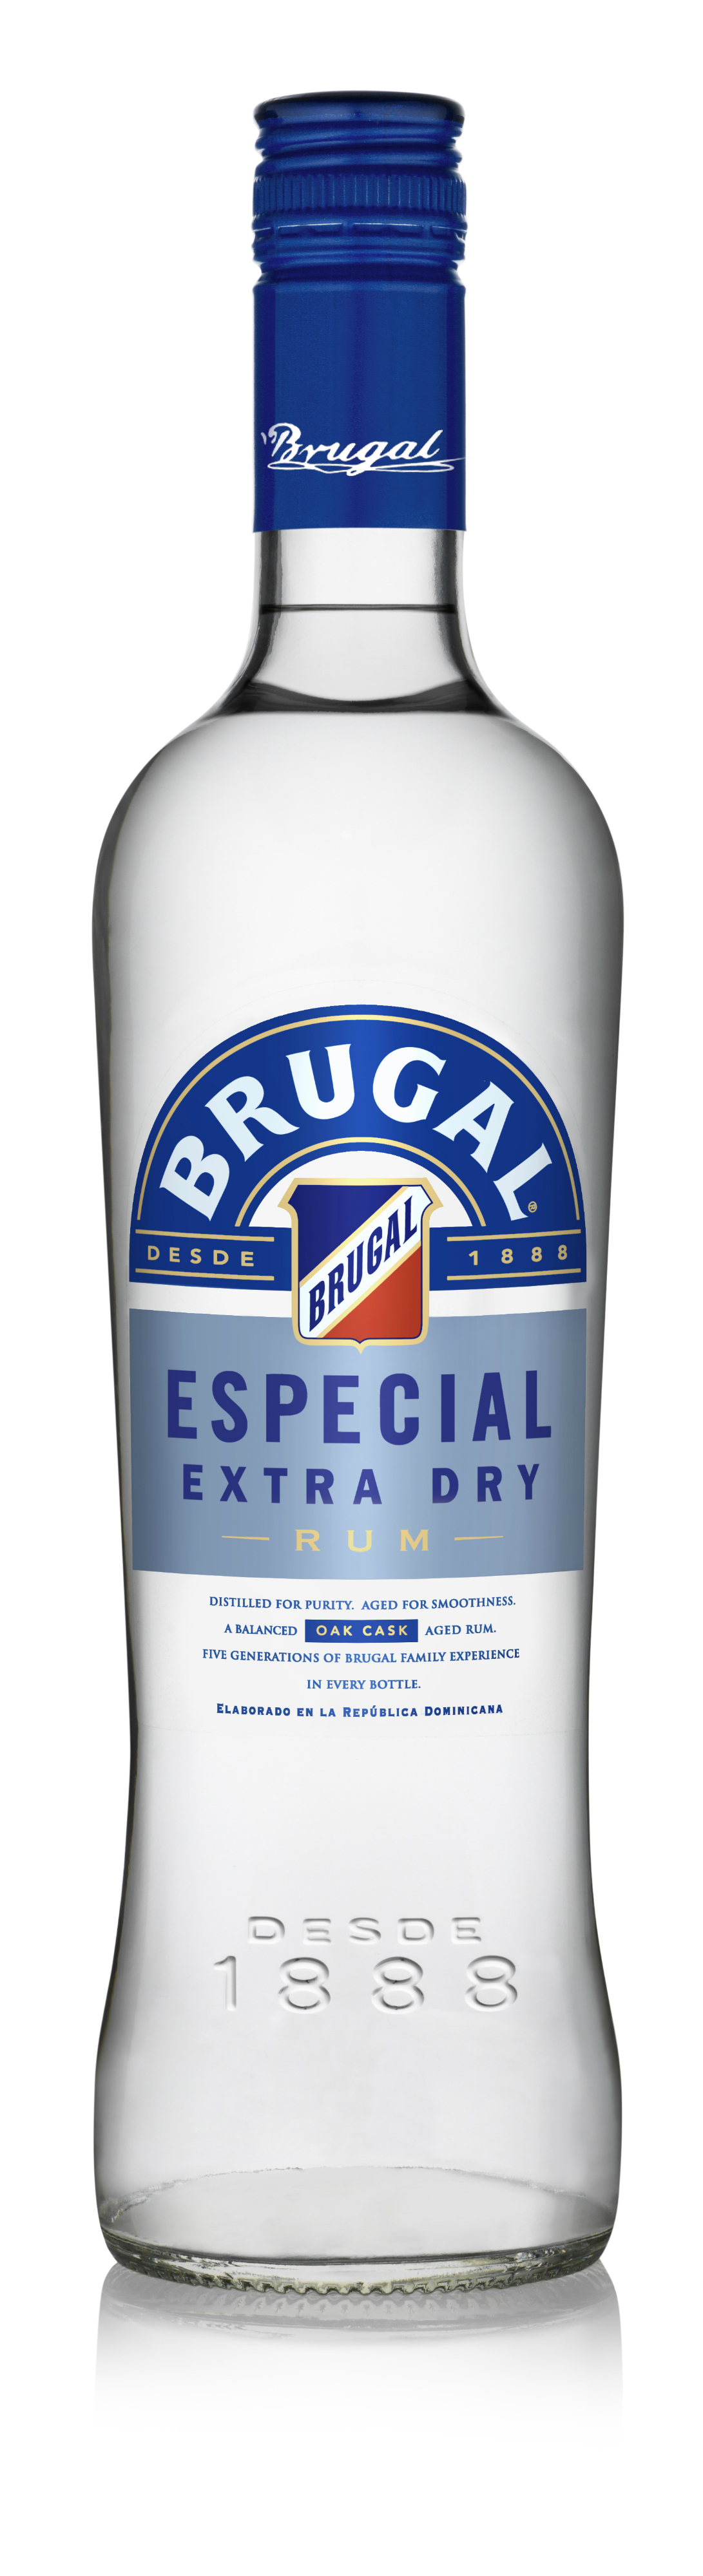 NUVO Daily Edit: Winter Whites, Brugal Extra Dry